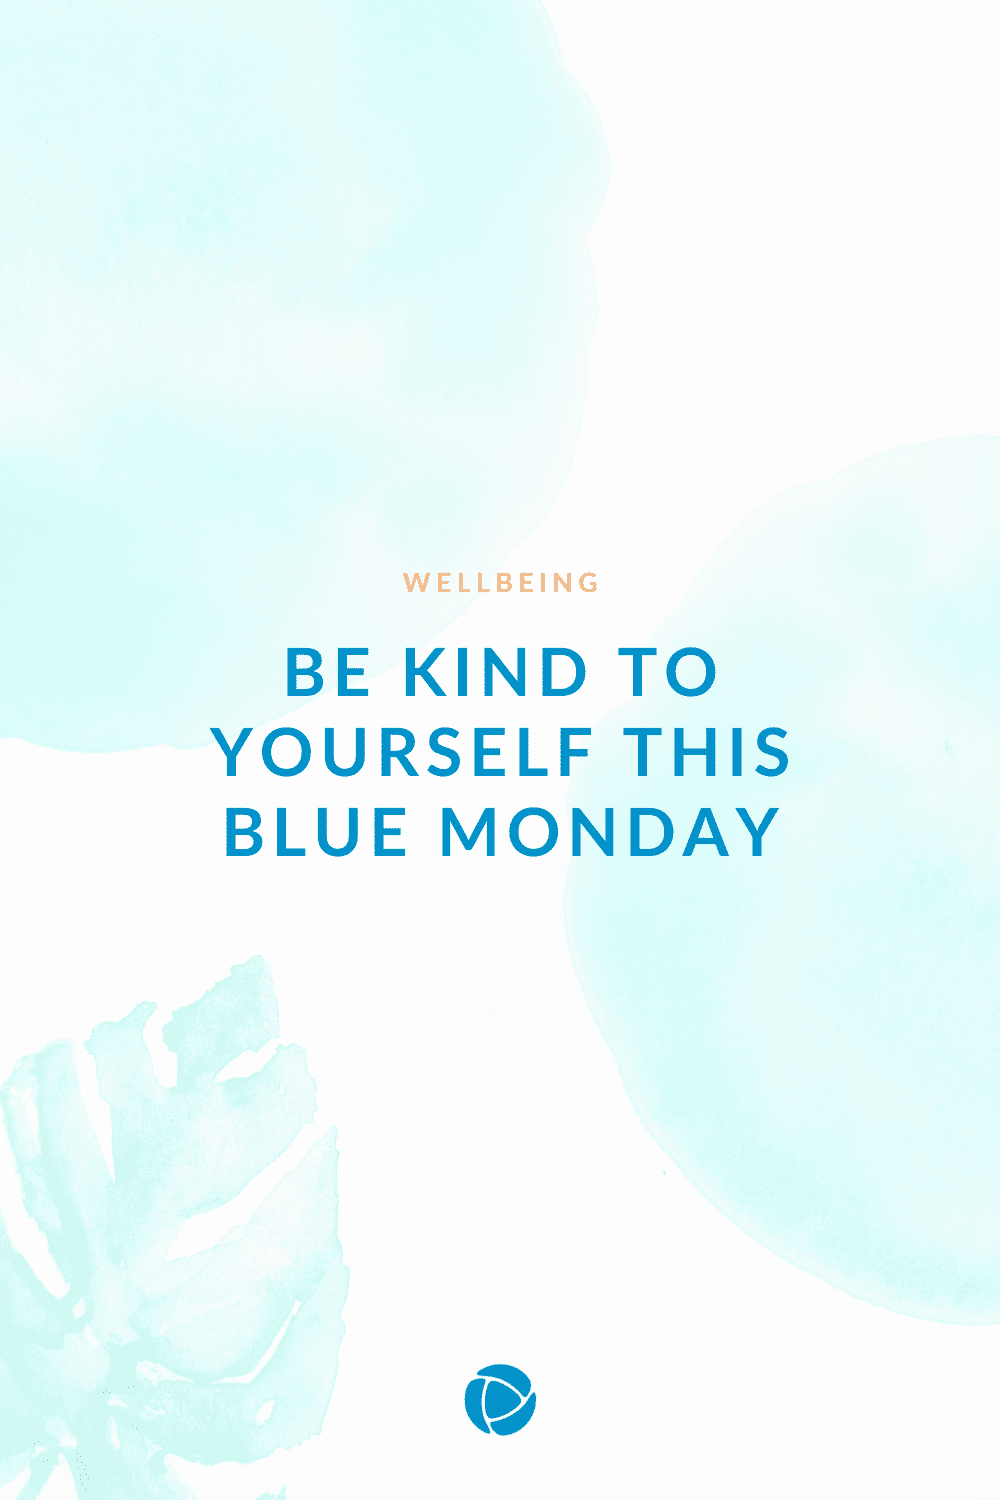 Be Kind to Yourself this Blue Monday